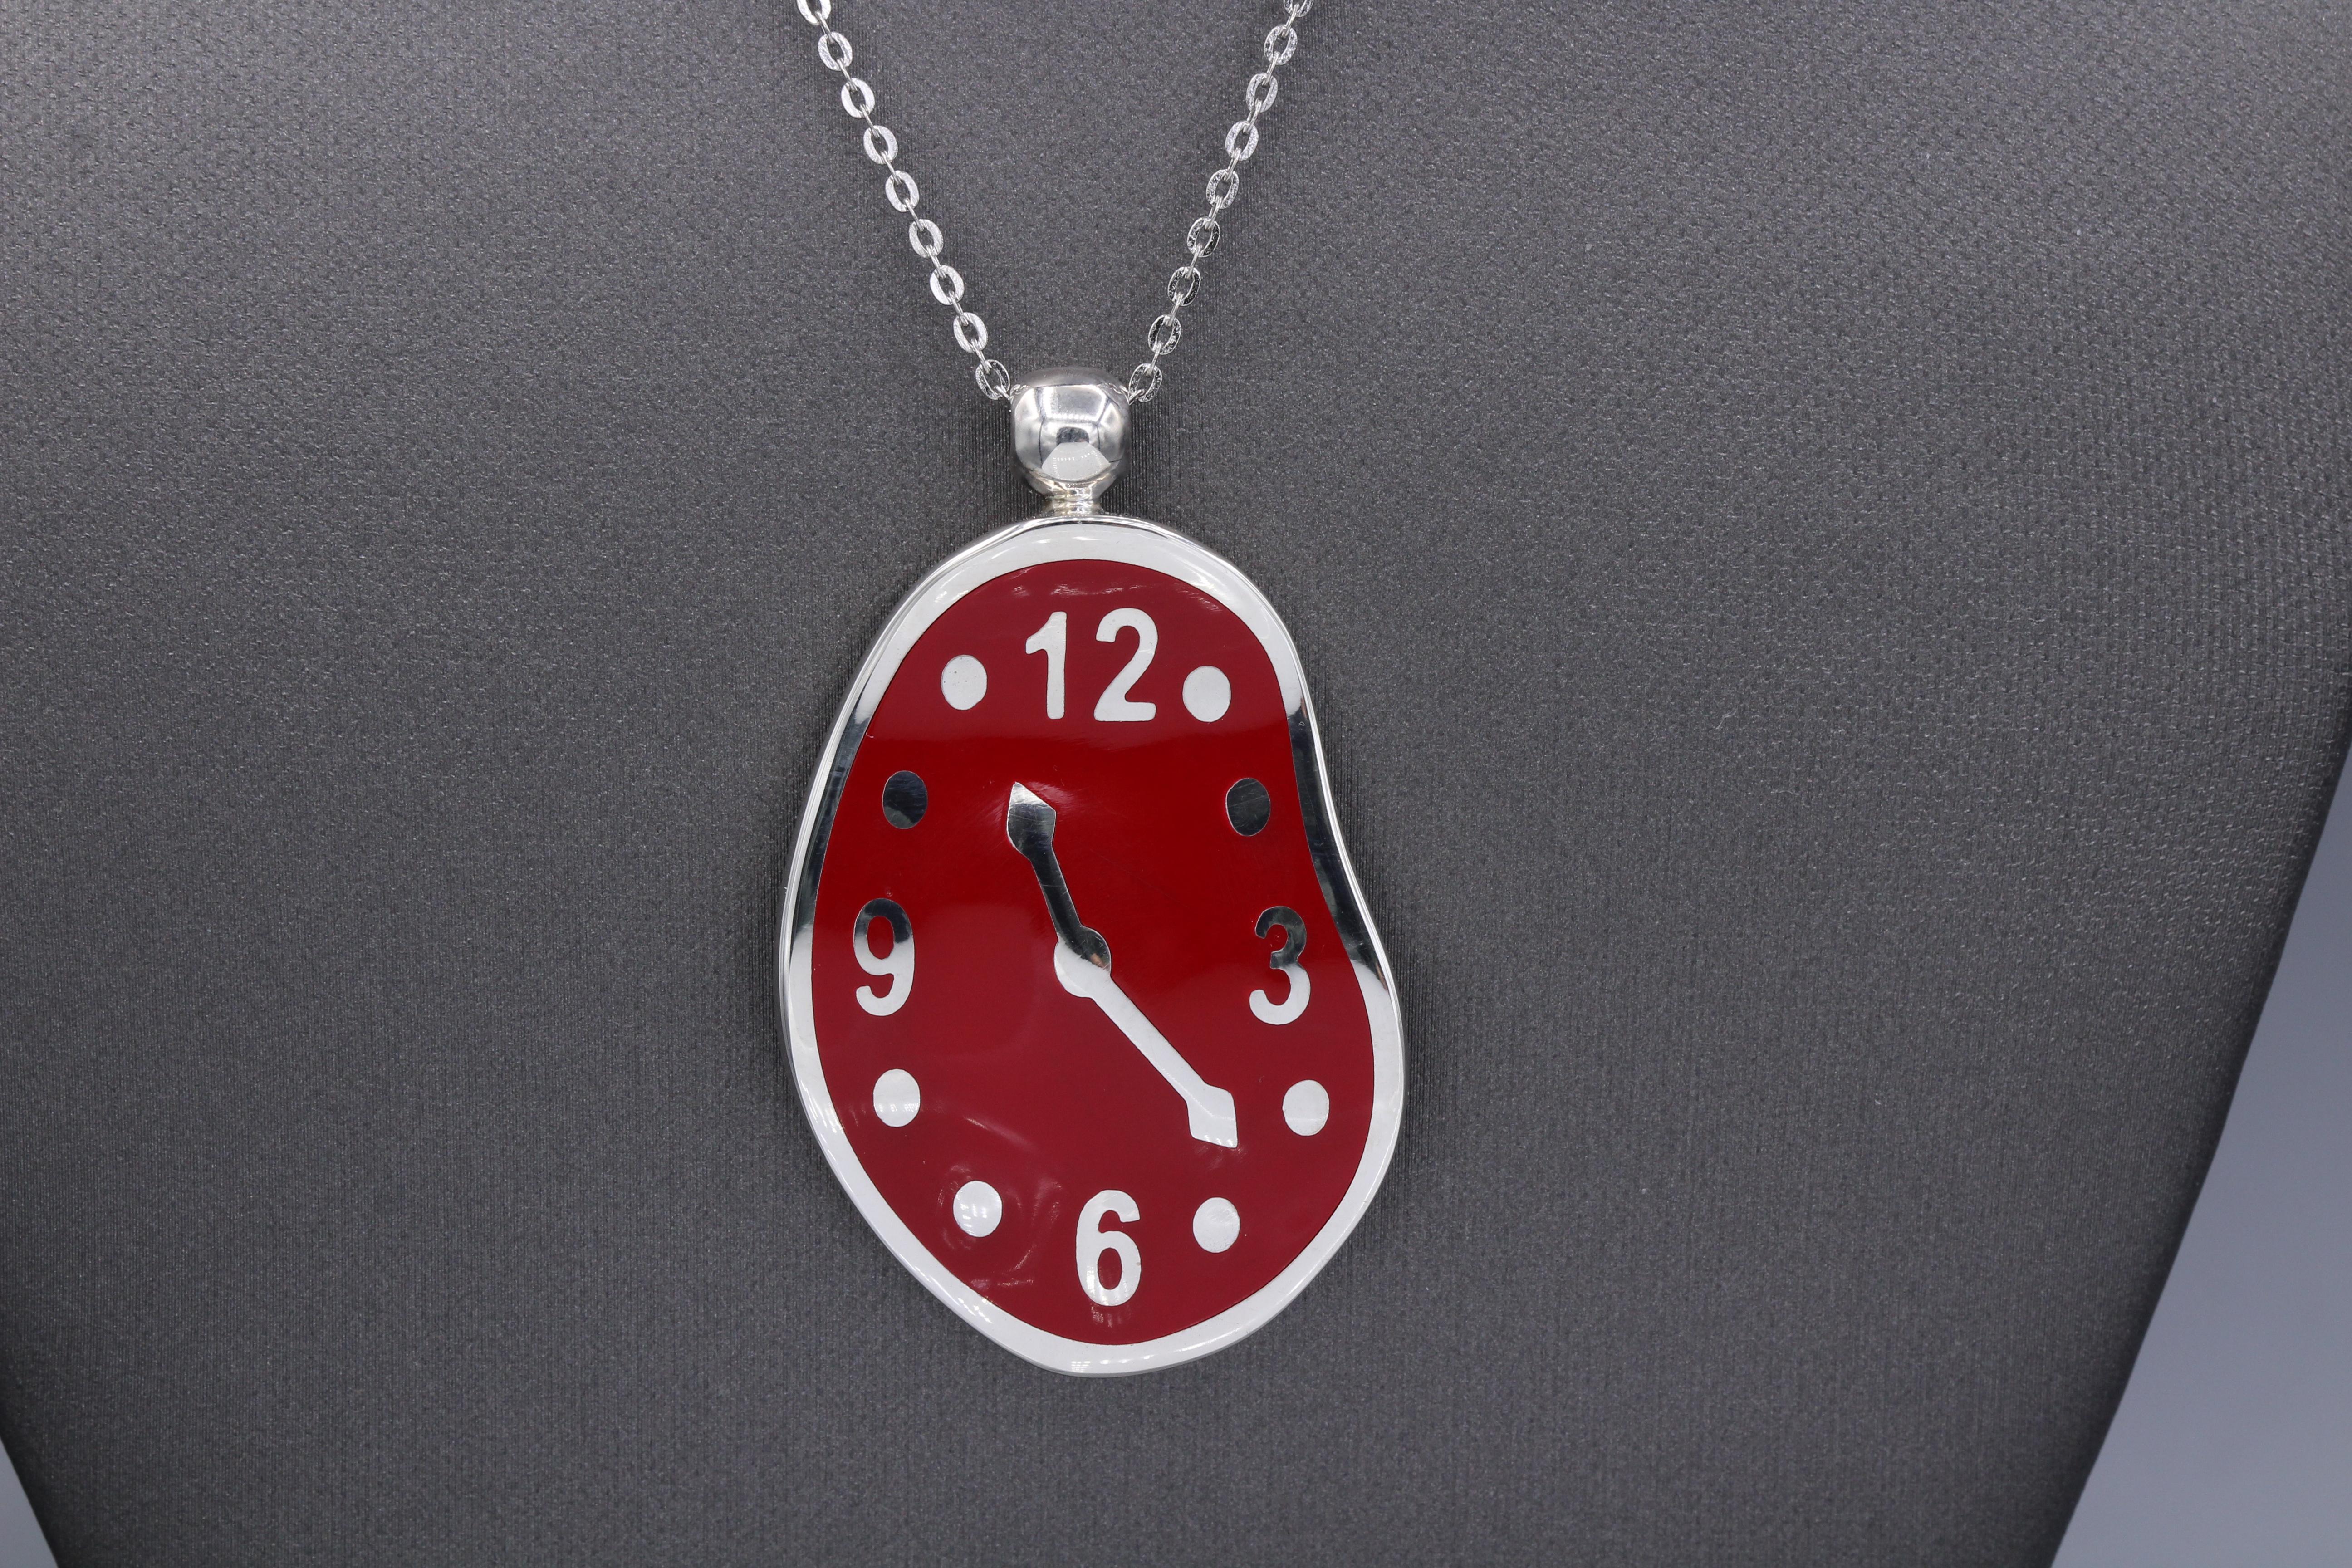 Melting Clock Art Inspired Necklace Silver 925 Famous ART Jewelry Dali In New Condition For Sale In Brooklyn, NY